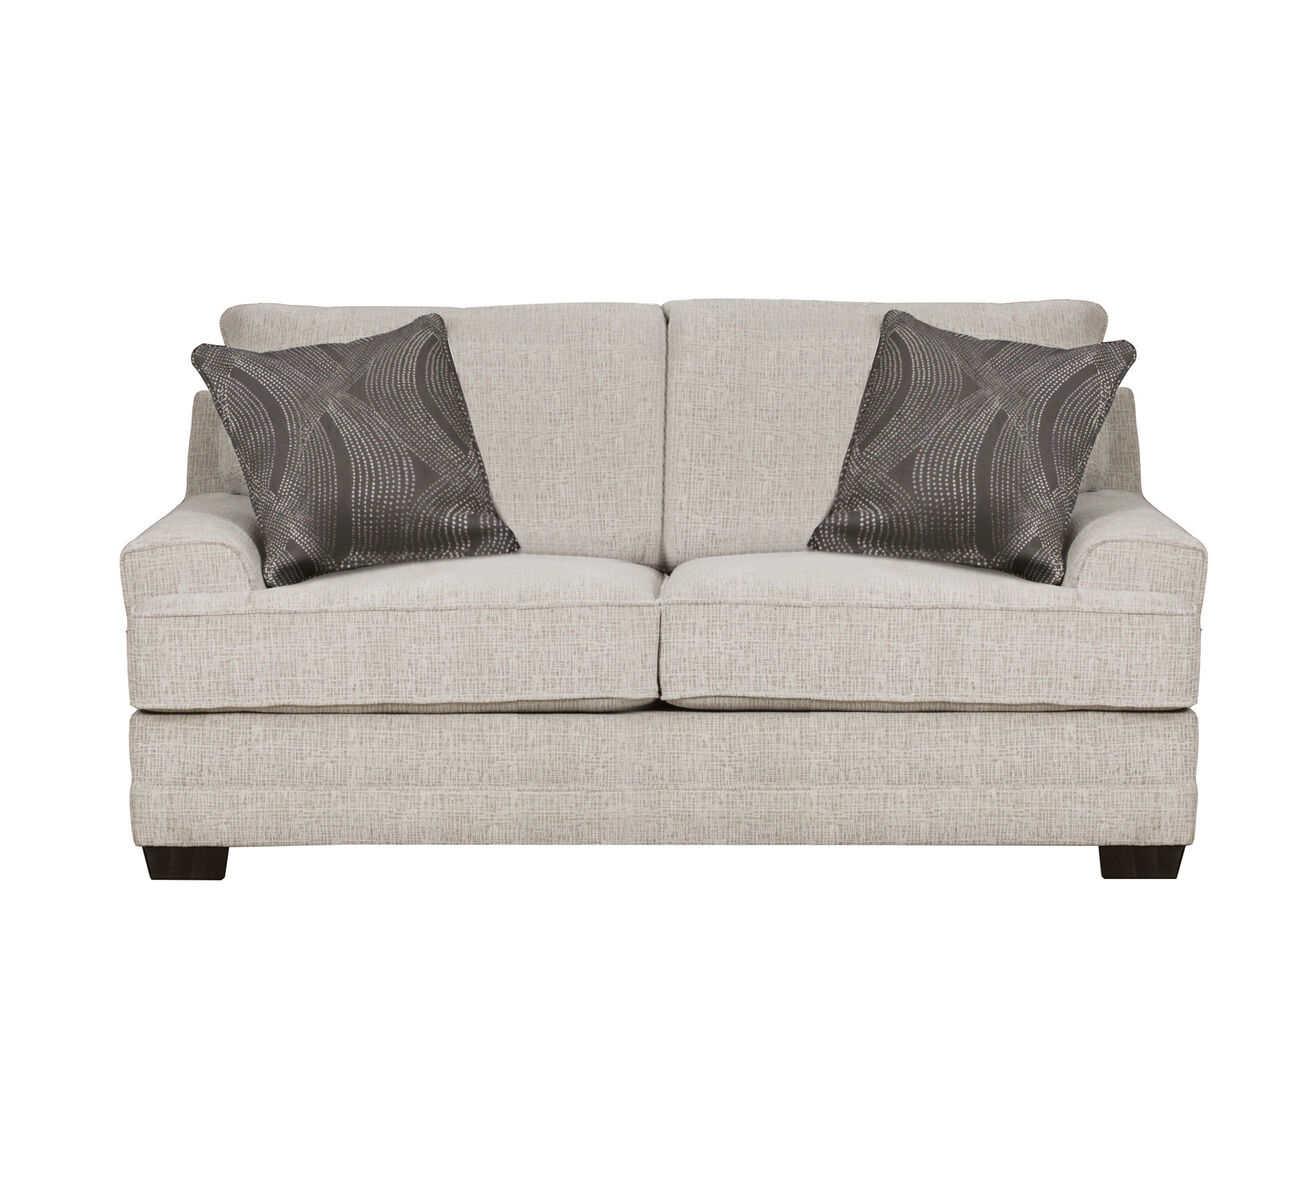 Chenille Fabric Upholstered Wooden Loveseat with Block Legs, Gray